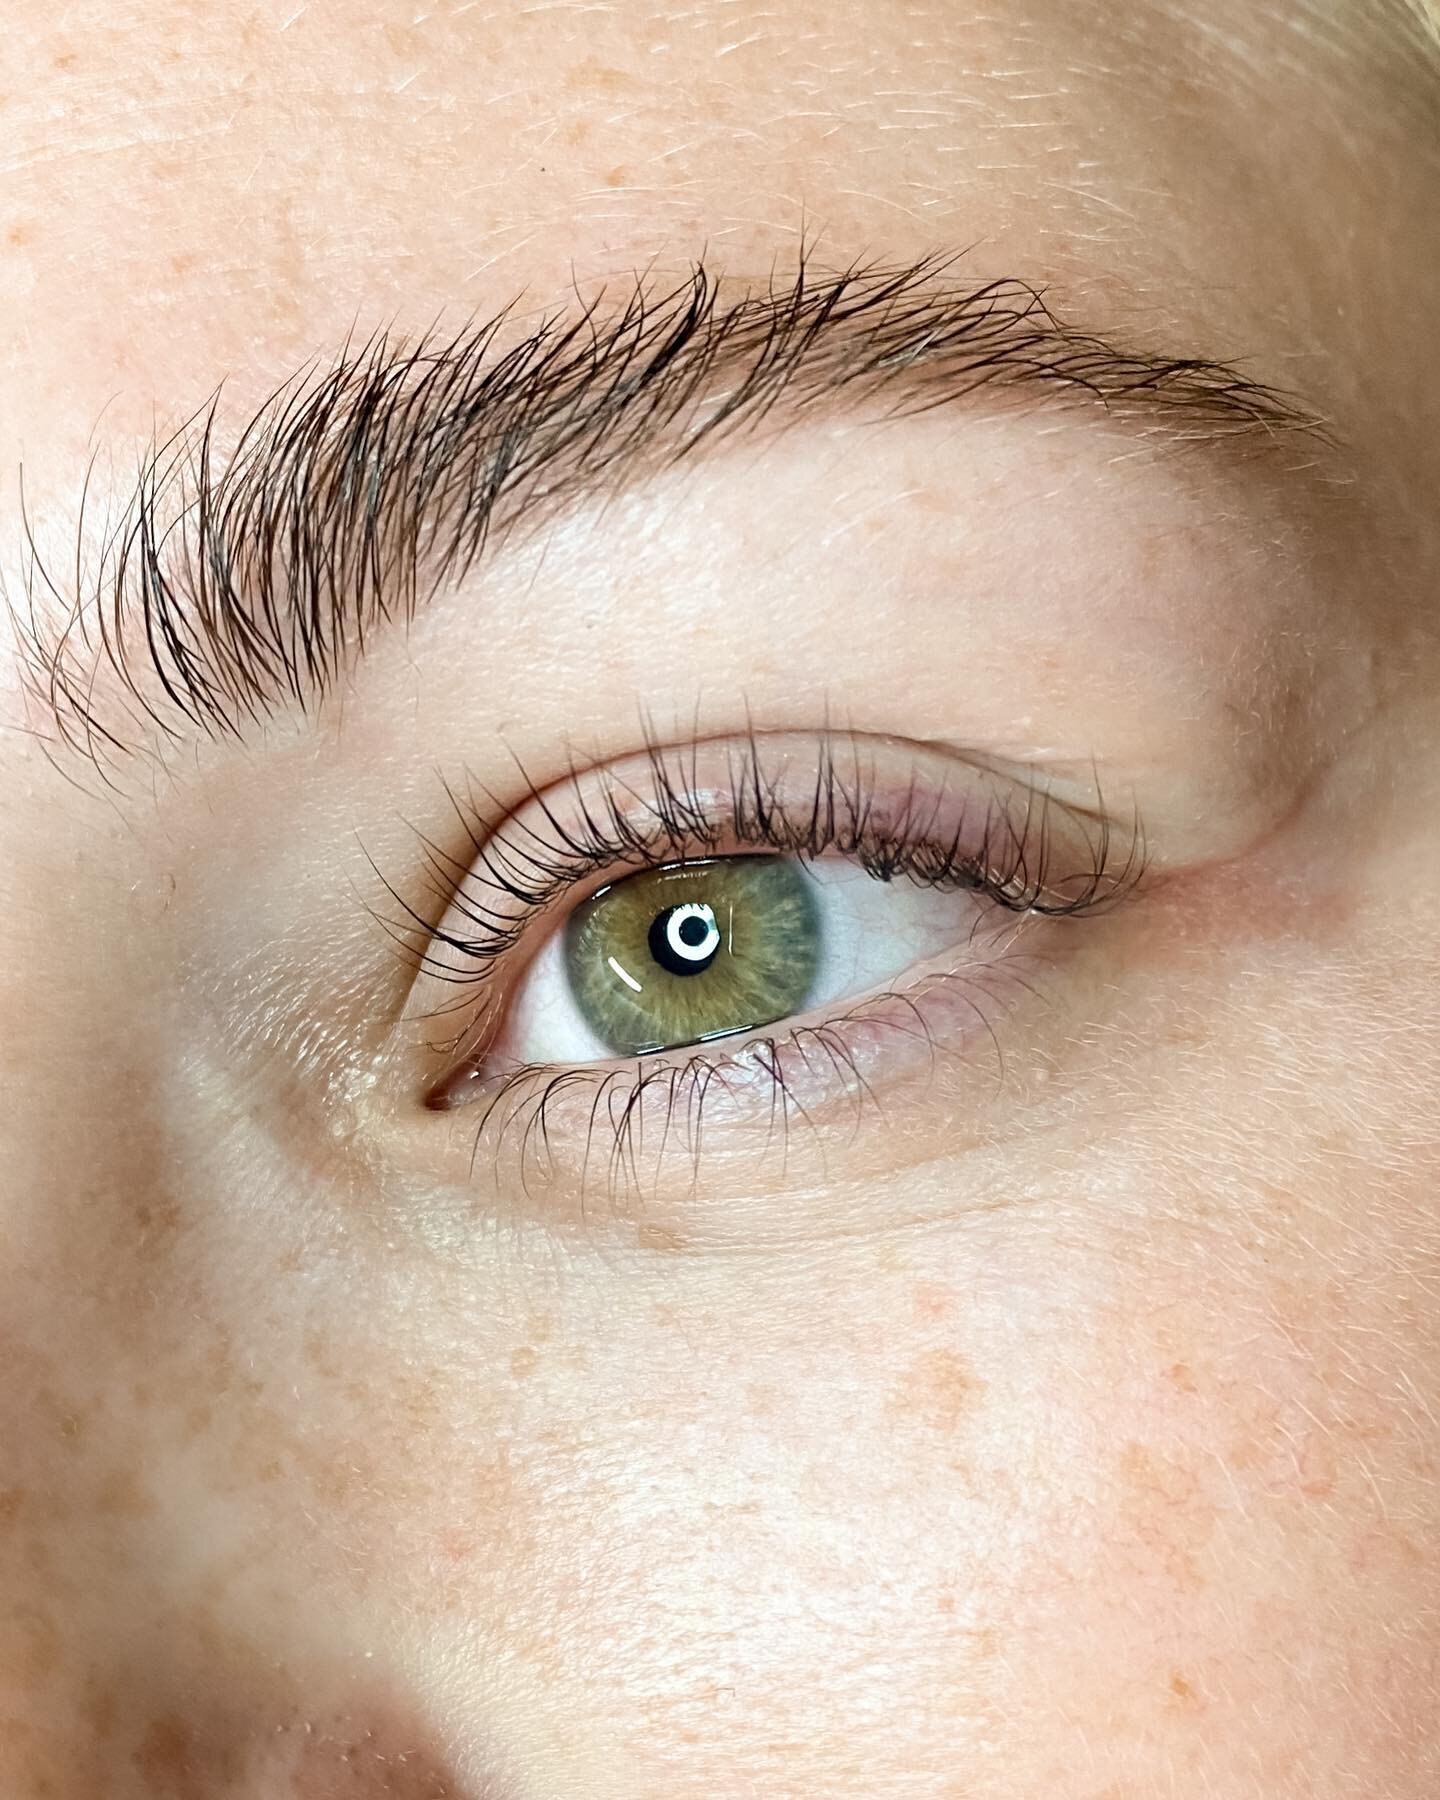 Carefree beauty always

Lash Lifting curls your natural lashes from base to tip, for an eye-opening look that is perfect for that minimalist beauty vibe.

Lash lifting is non-damaging and a simplified beauty hack that requires no maintenance. Results